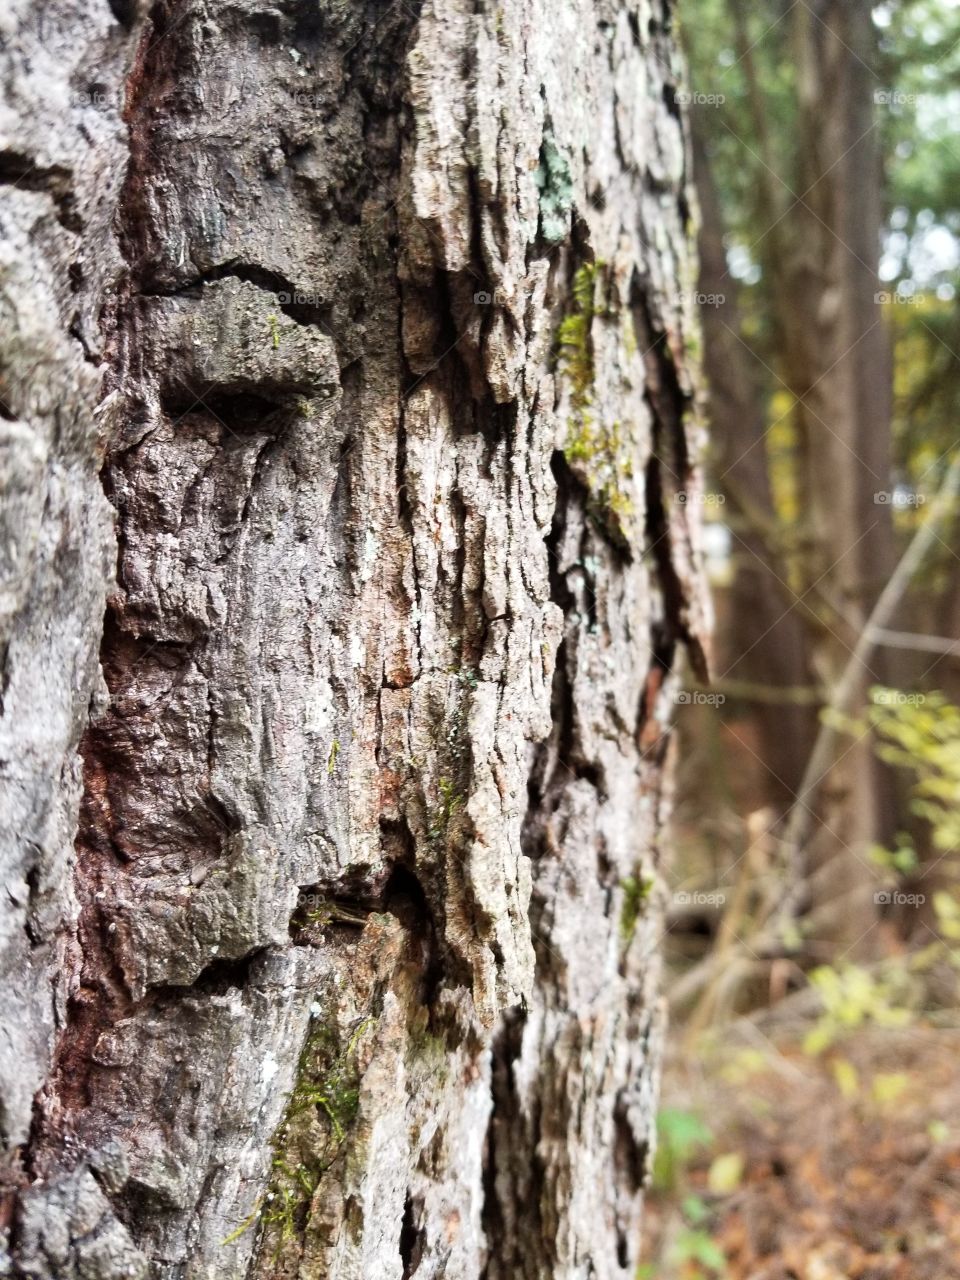 Face in the bark